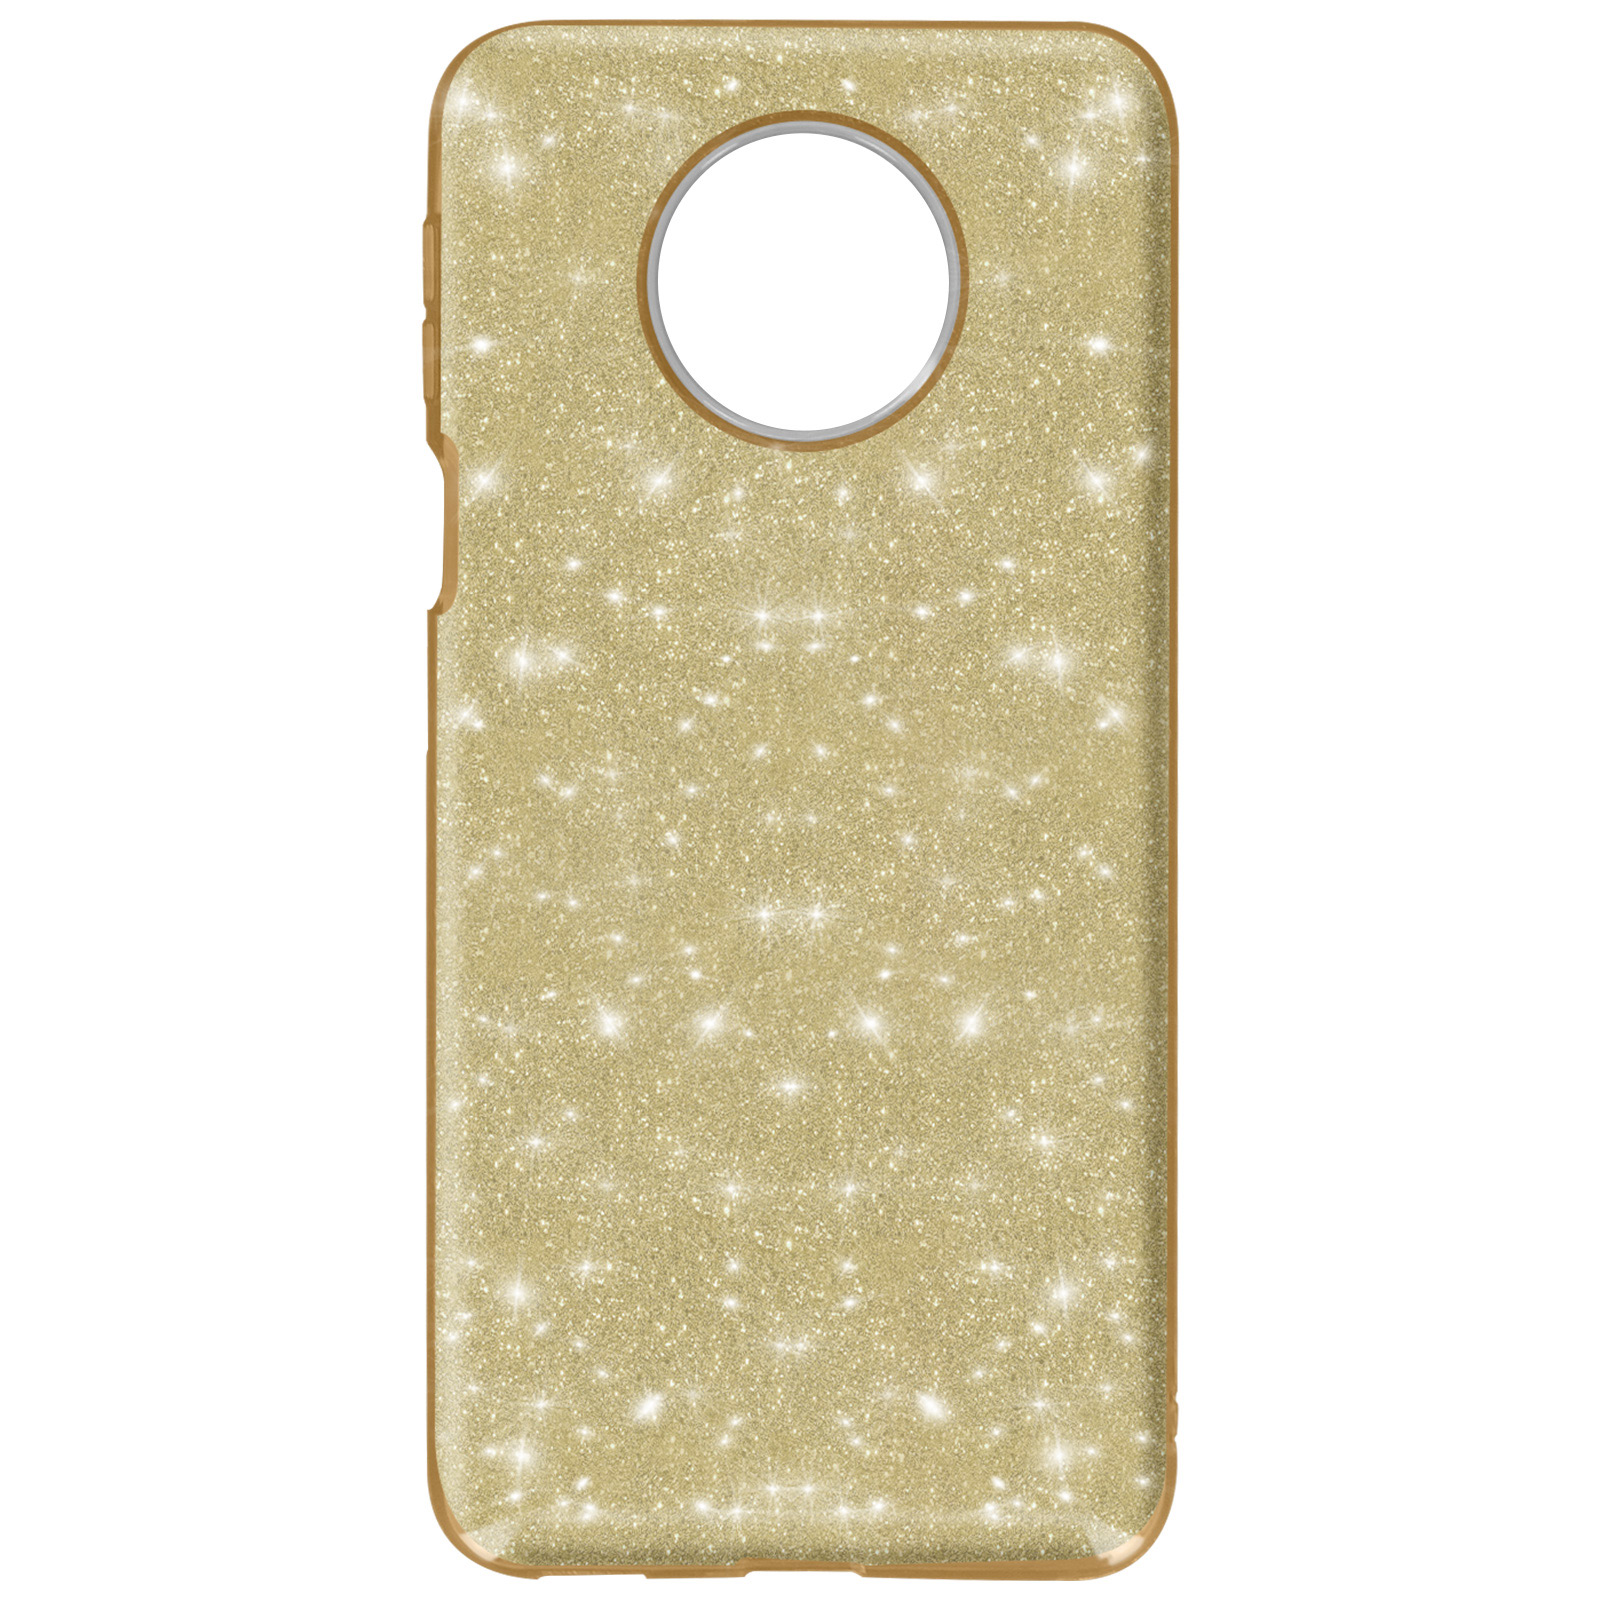 AVIZAR Papay Redmi Backcover, 5G, Note Series, 9T Gold Xiaomi